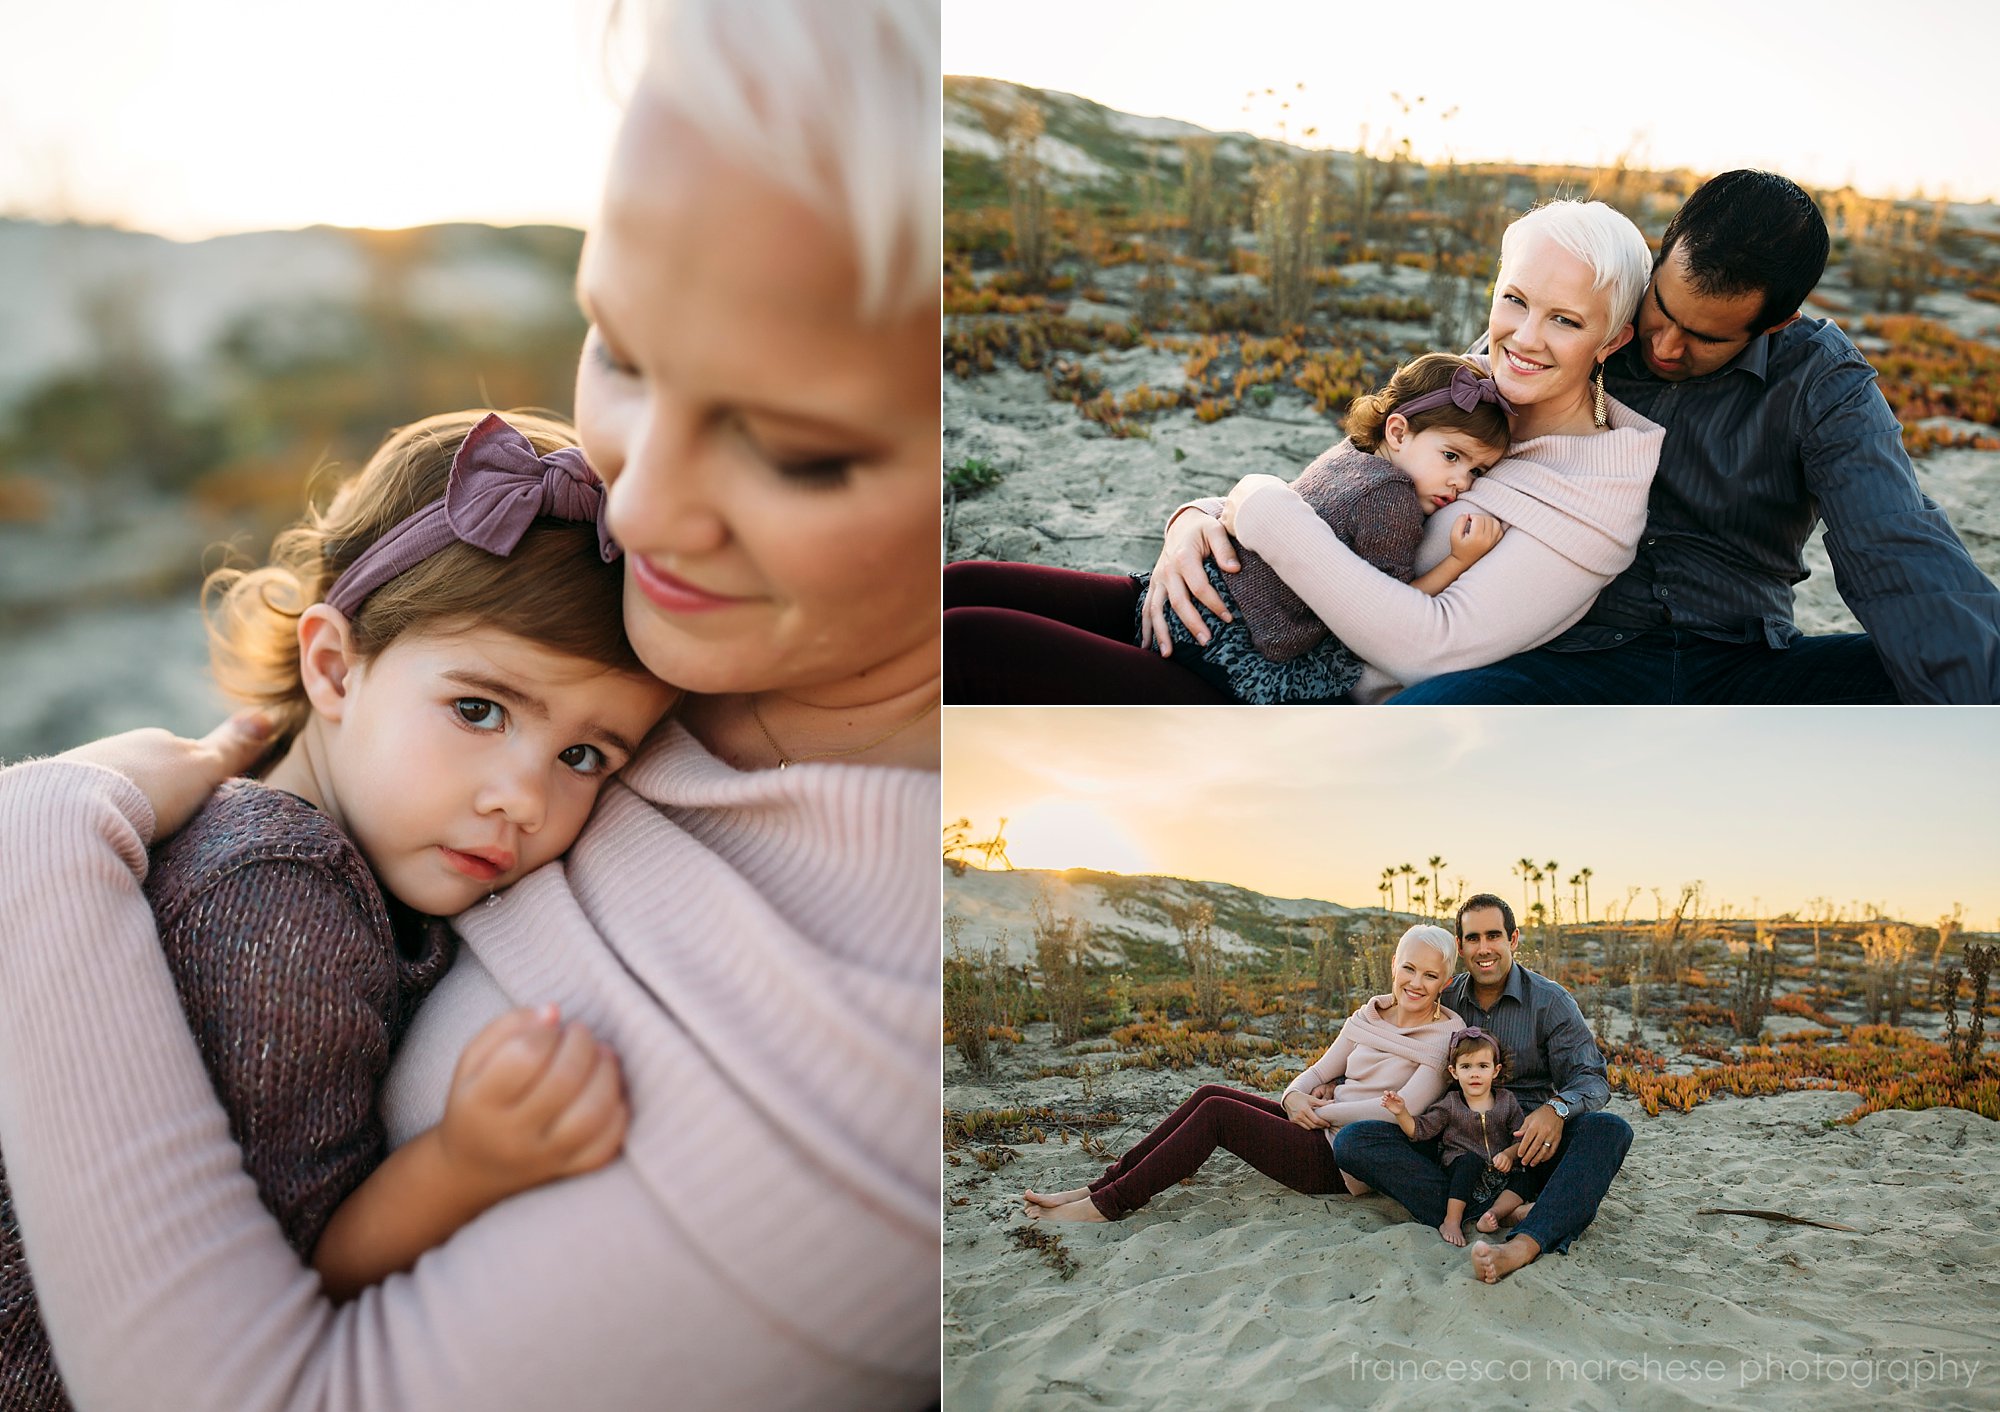 family of 3 at the beach - Francesca Marchese Photography Orange County Los Angeles Southern California Family Photographer